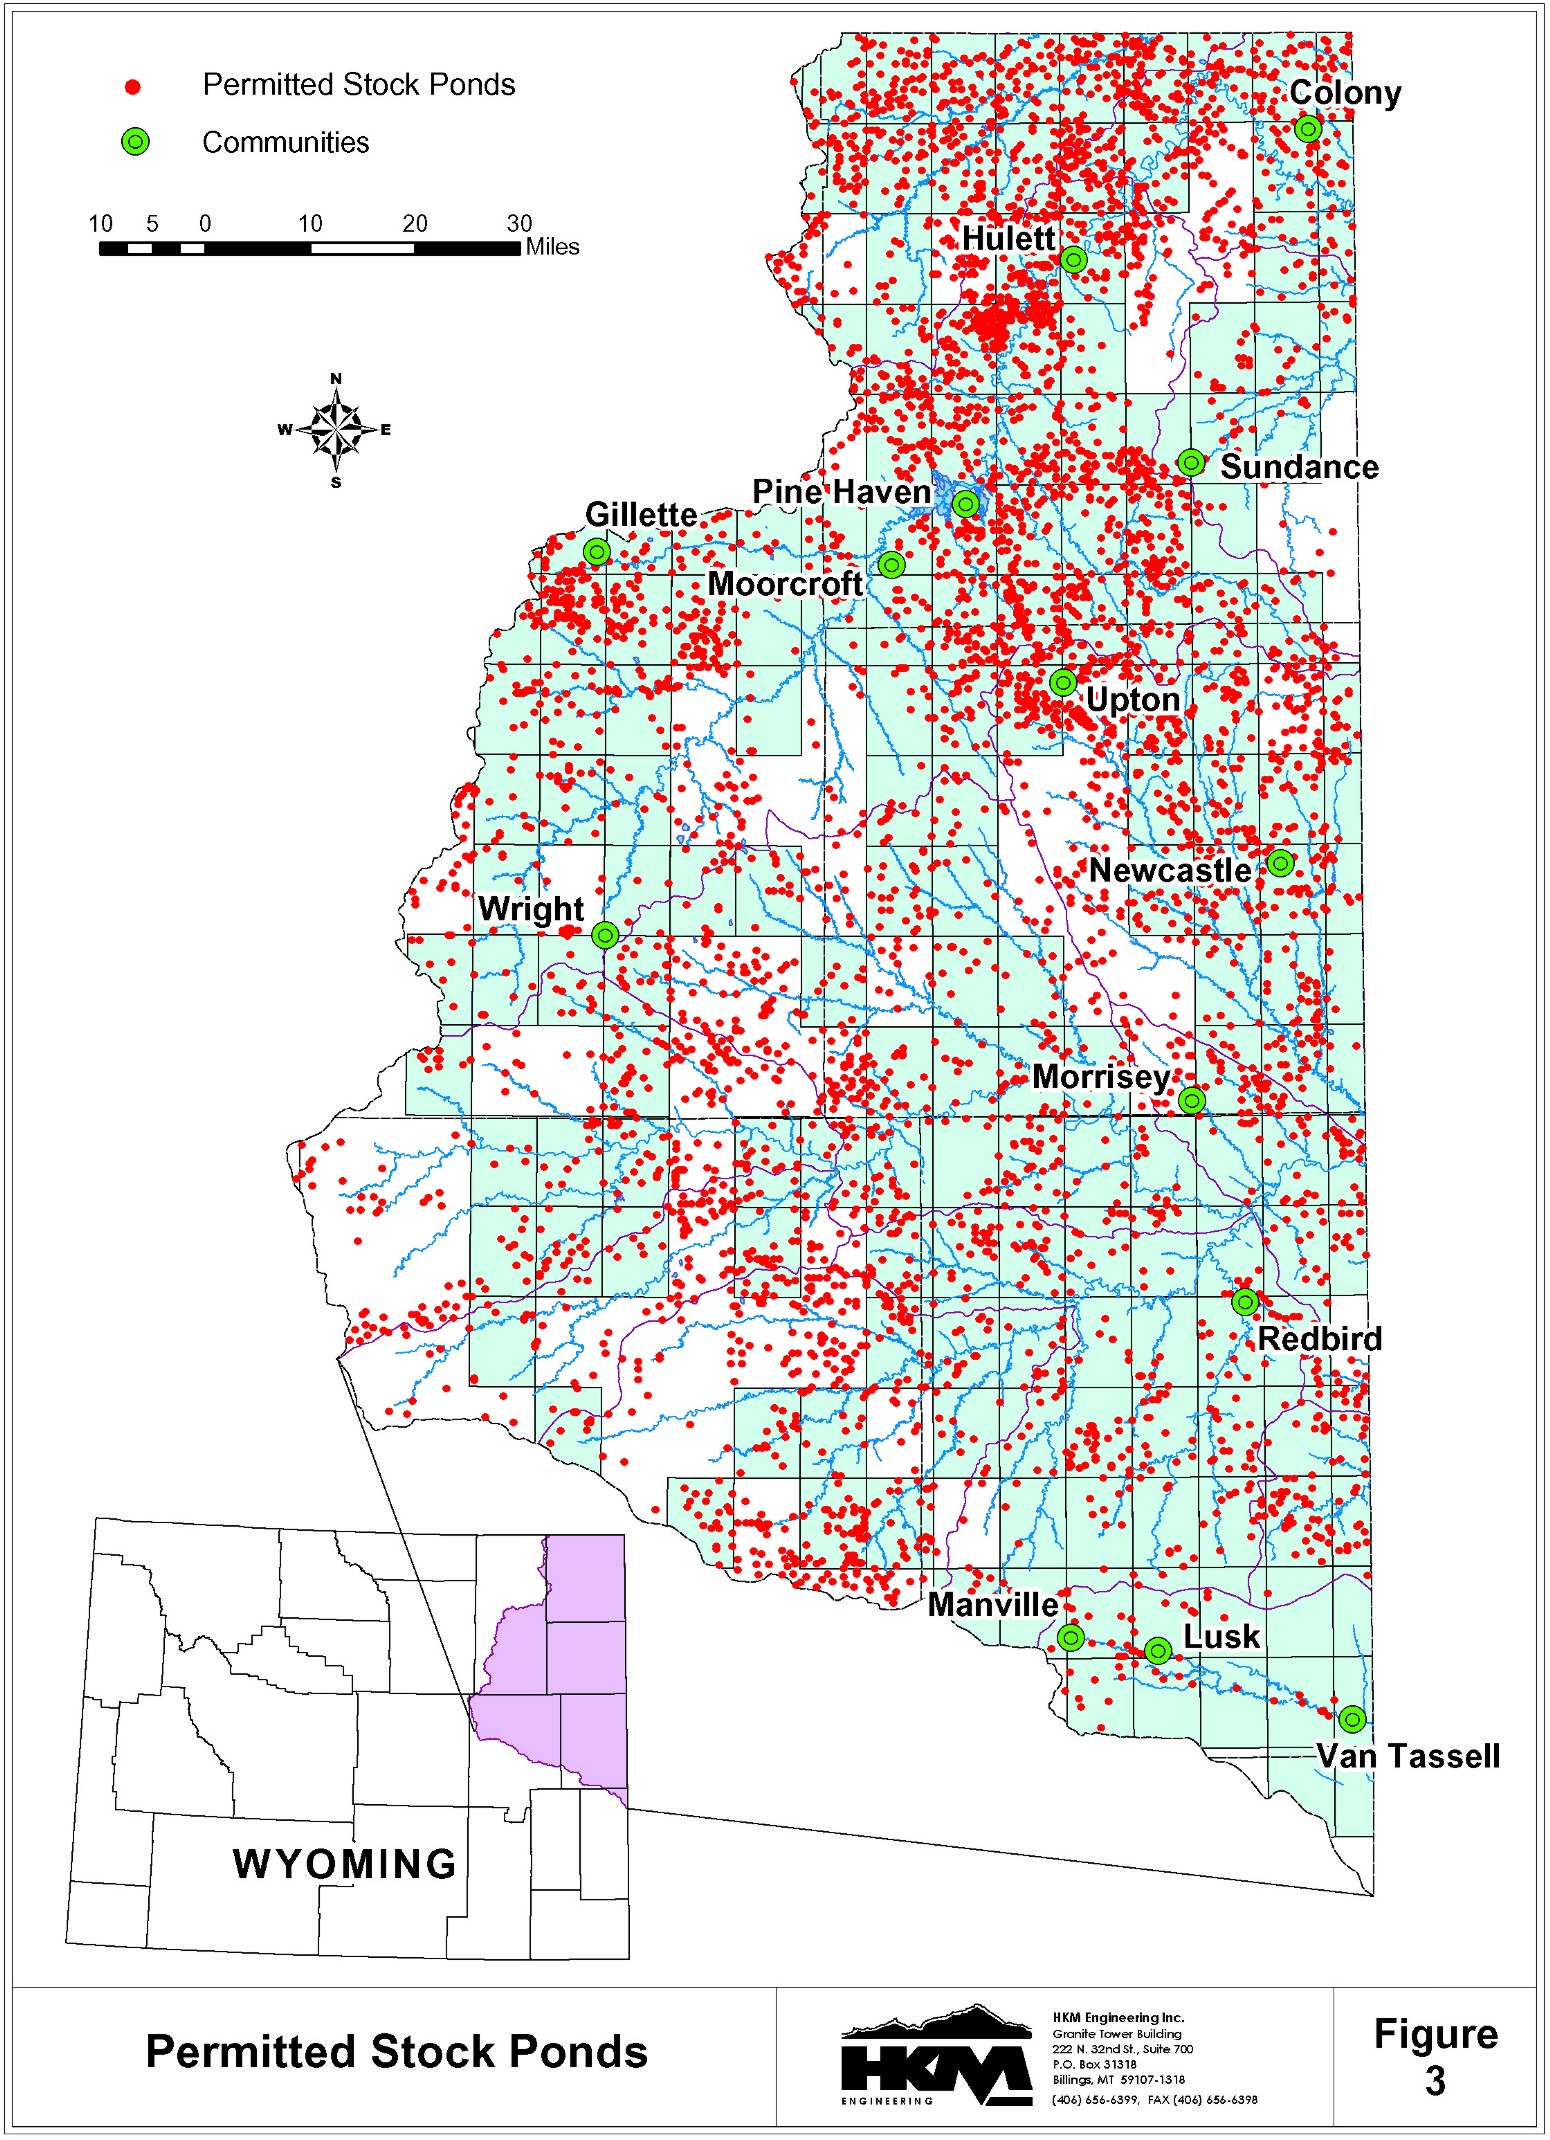 Permitted Stock Ponds, Northeast Wyoming River Basins